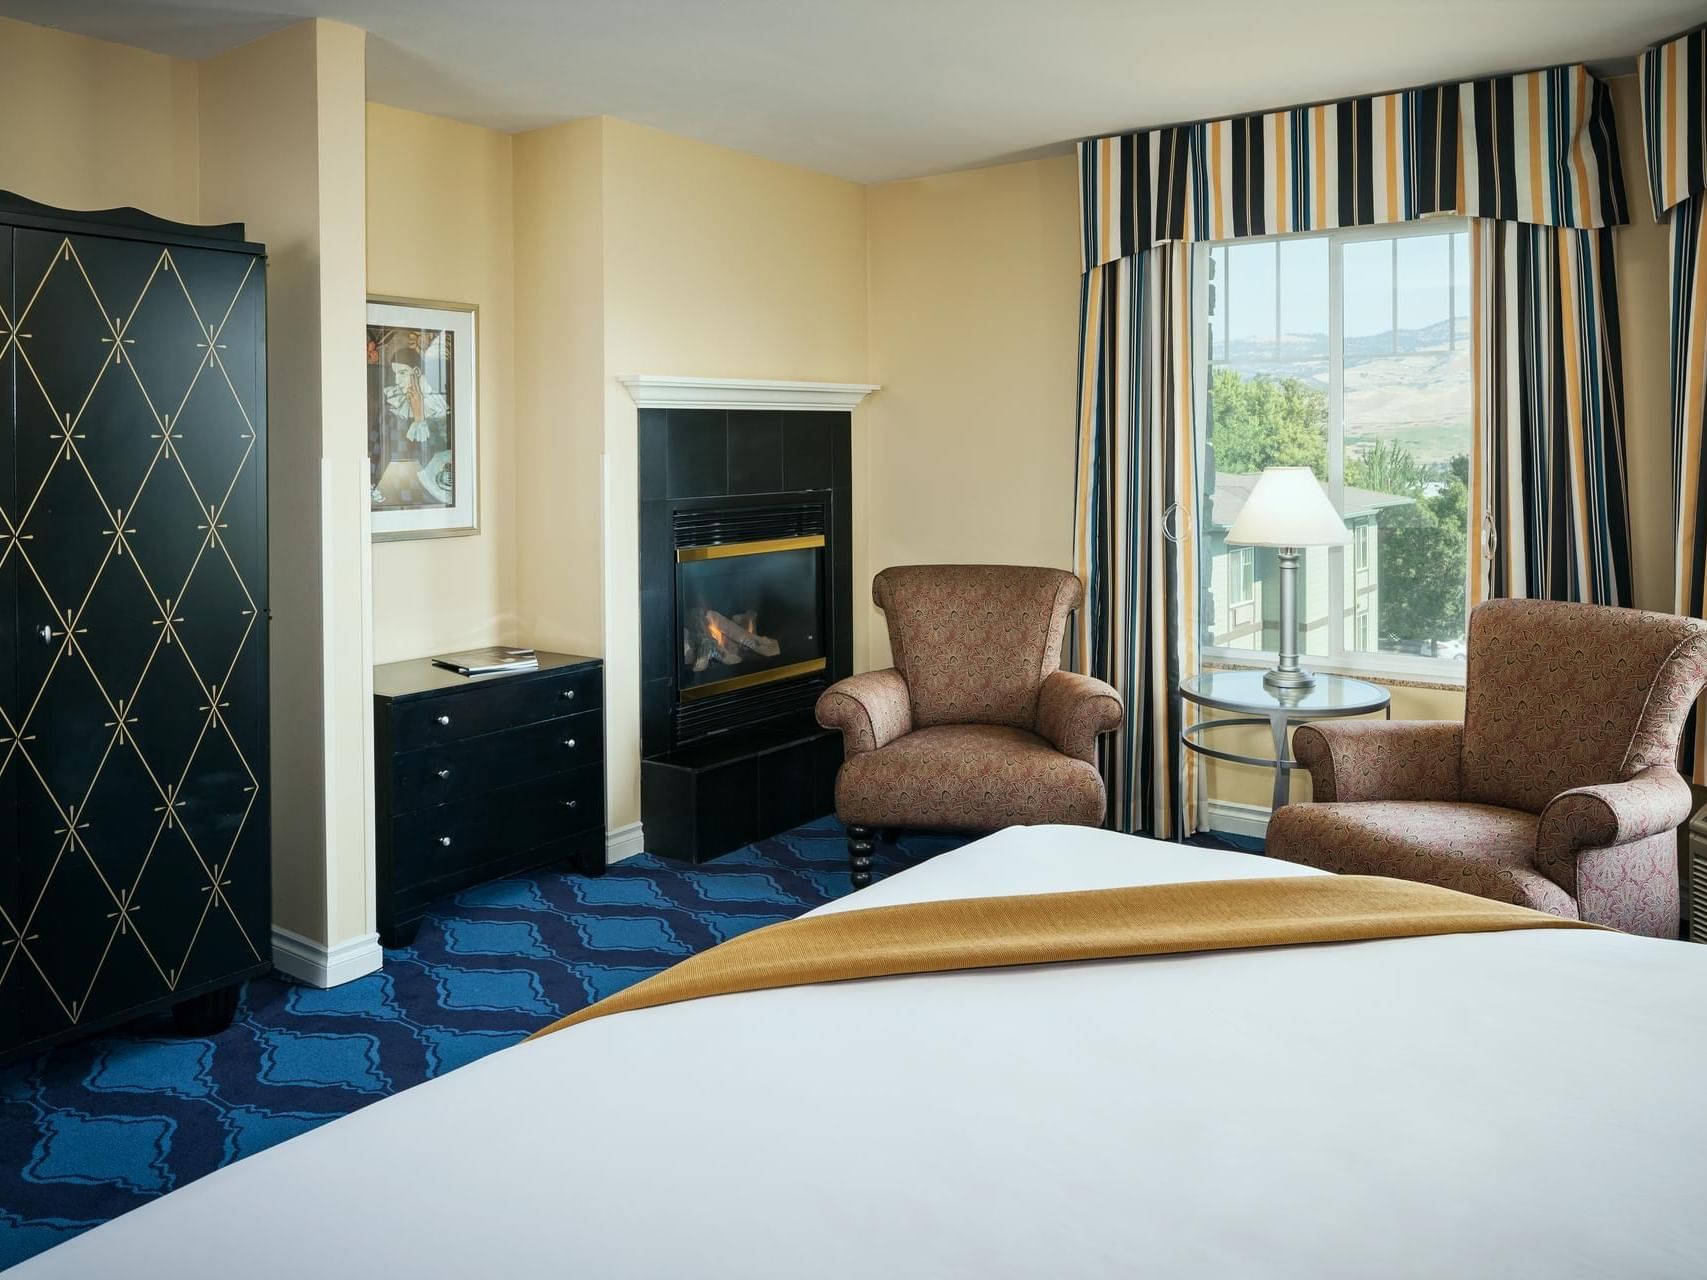 Sitting area with city view in ​the Fireplace King Non-View room of Plaza Inn & Suites at Ashland Creek​